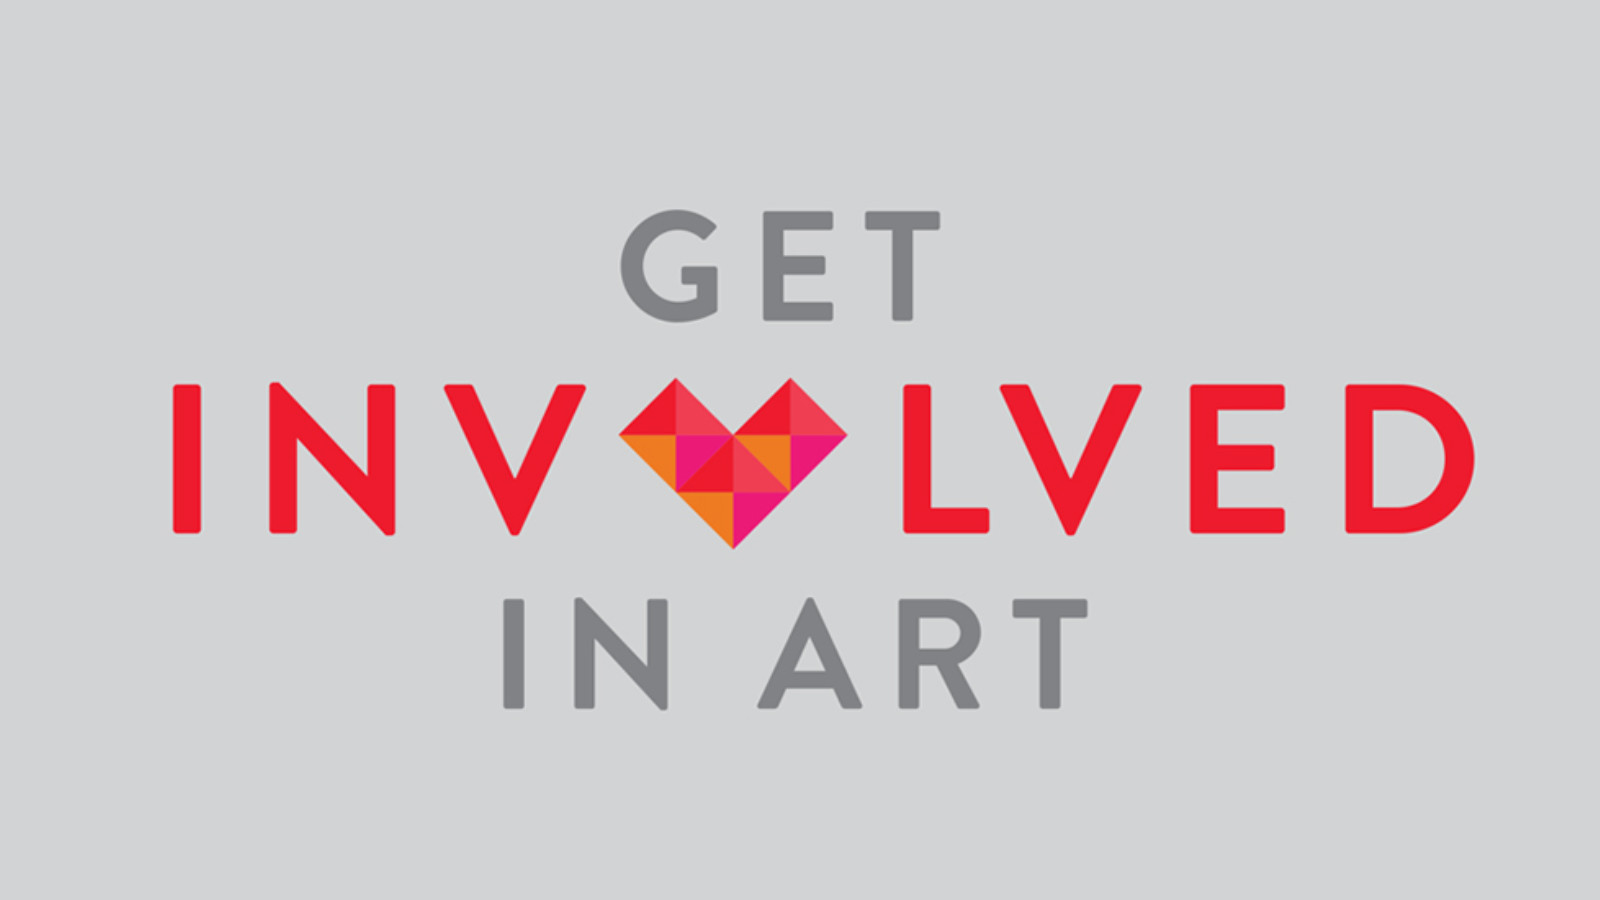 Grey and red text reads 'GET INVOLVED IN ART' in capital letters.